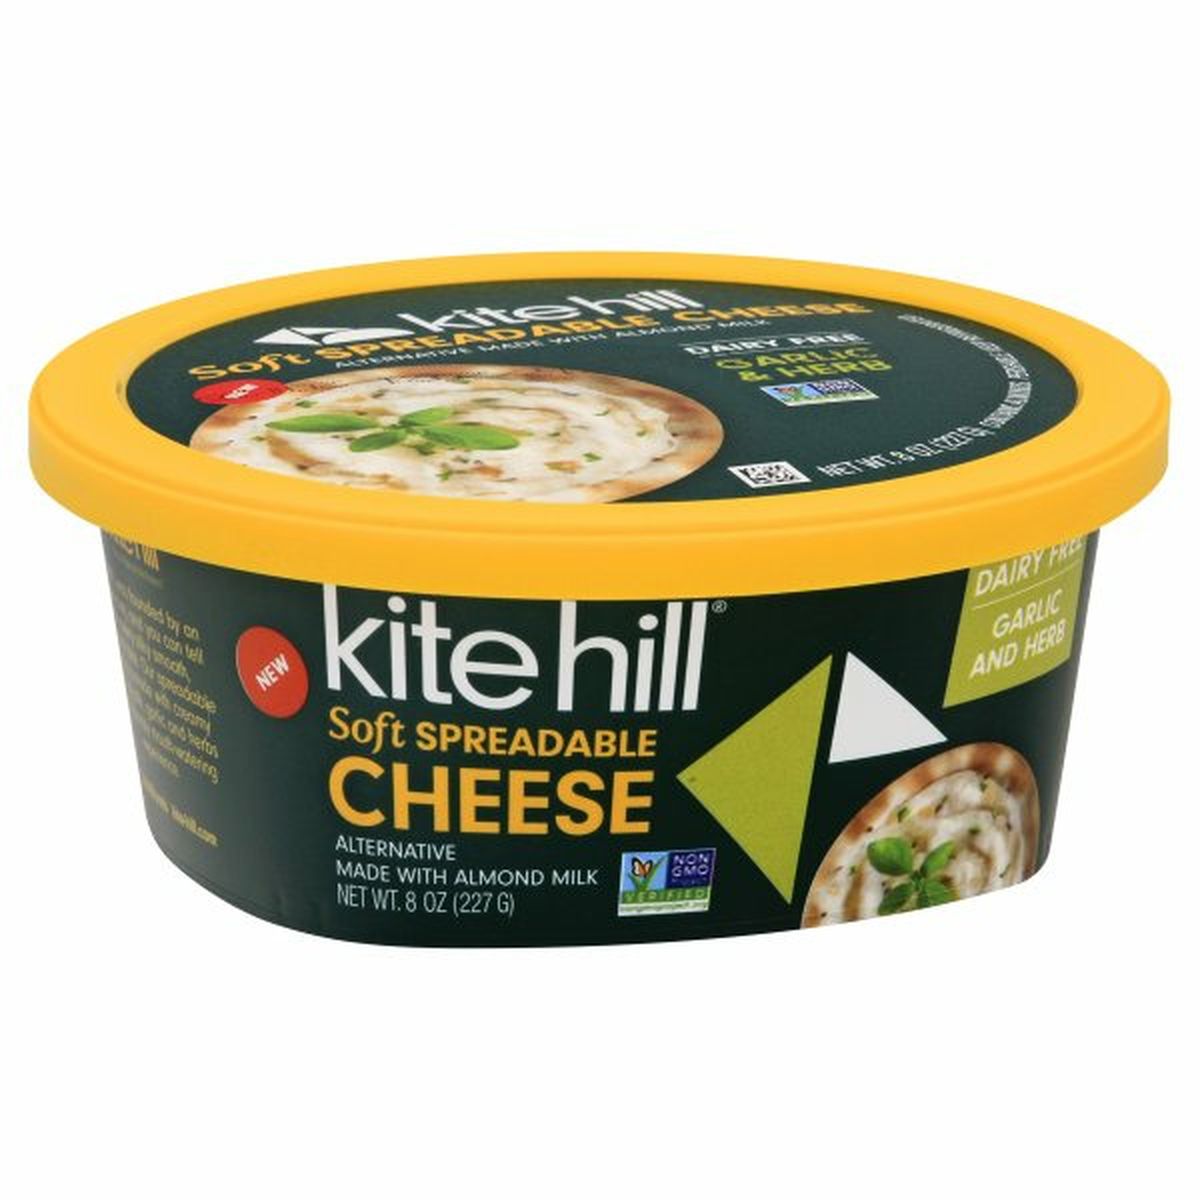 Calories in Kite Hill Cheese, Soft, Spreadable, Garlic & Herb, Dairy Free